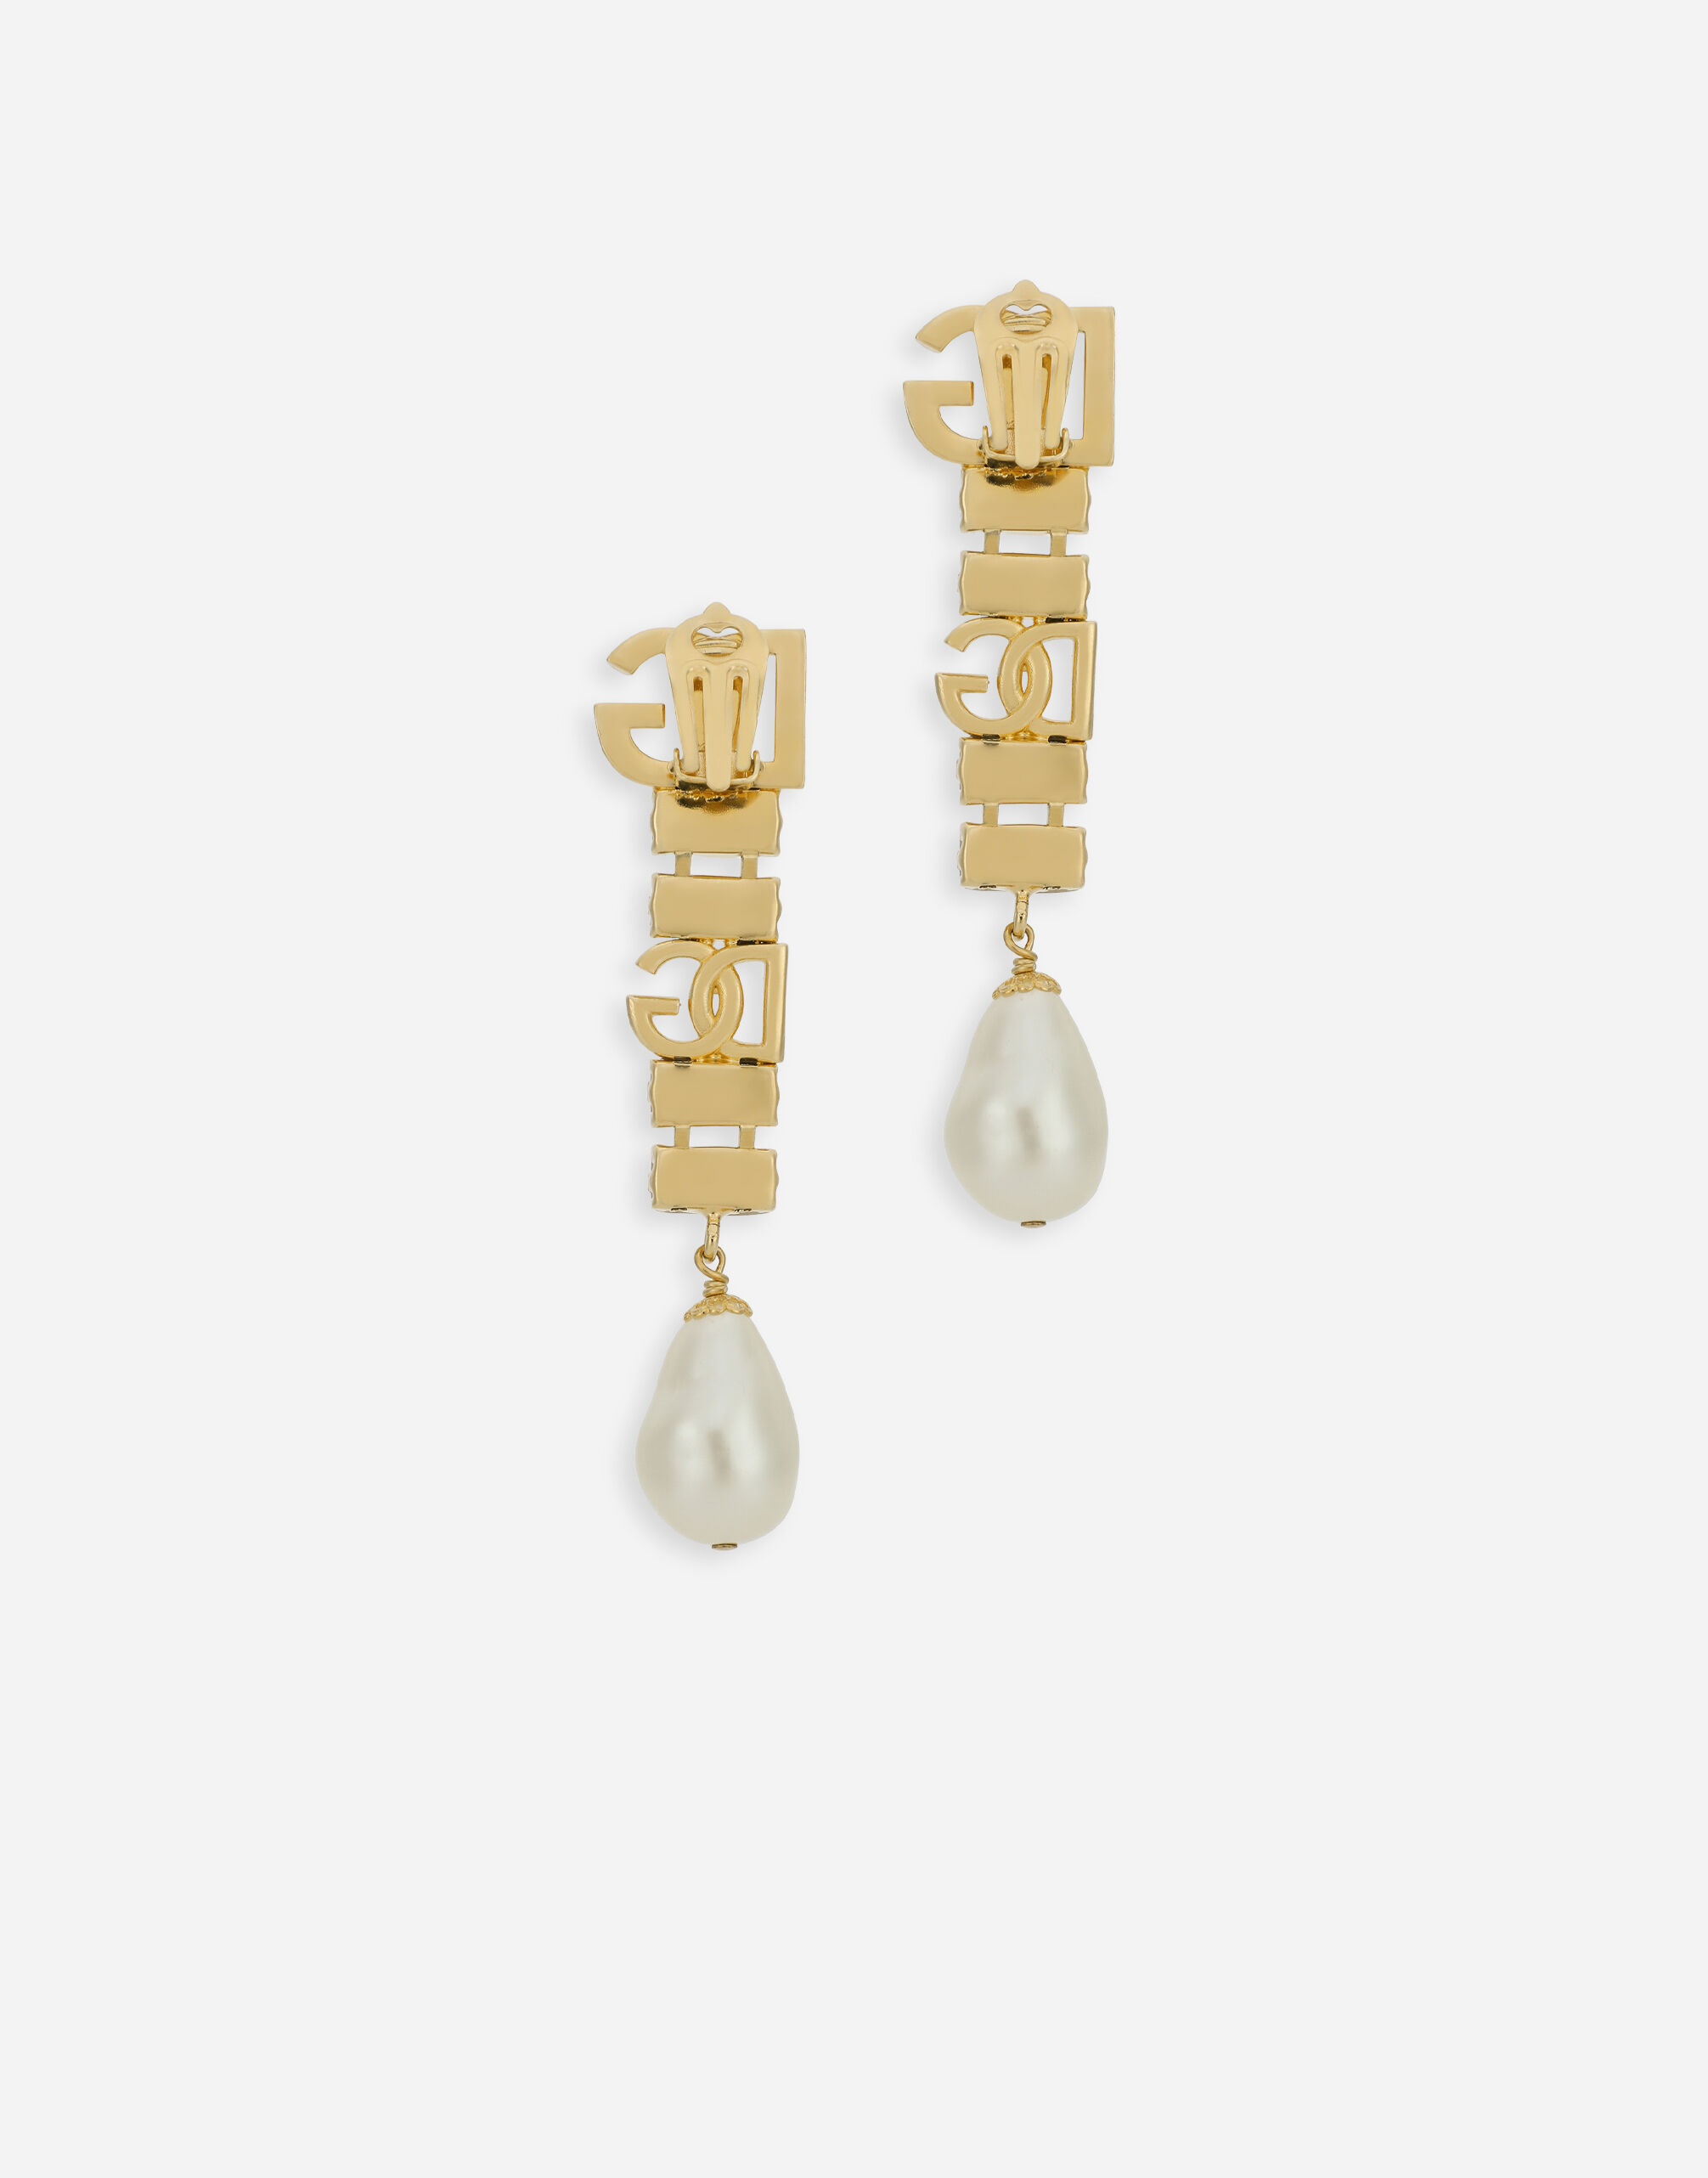 Drop earrings with pearls, rhinestones and DG logo in Gold for 